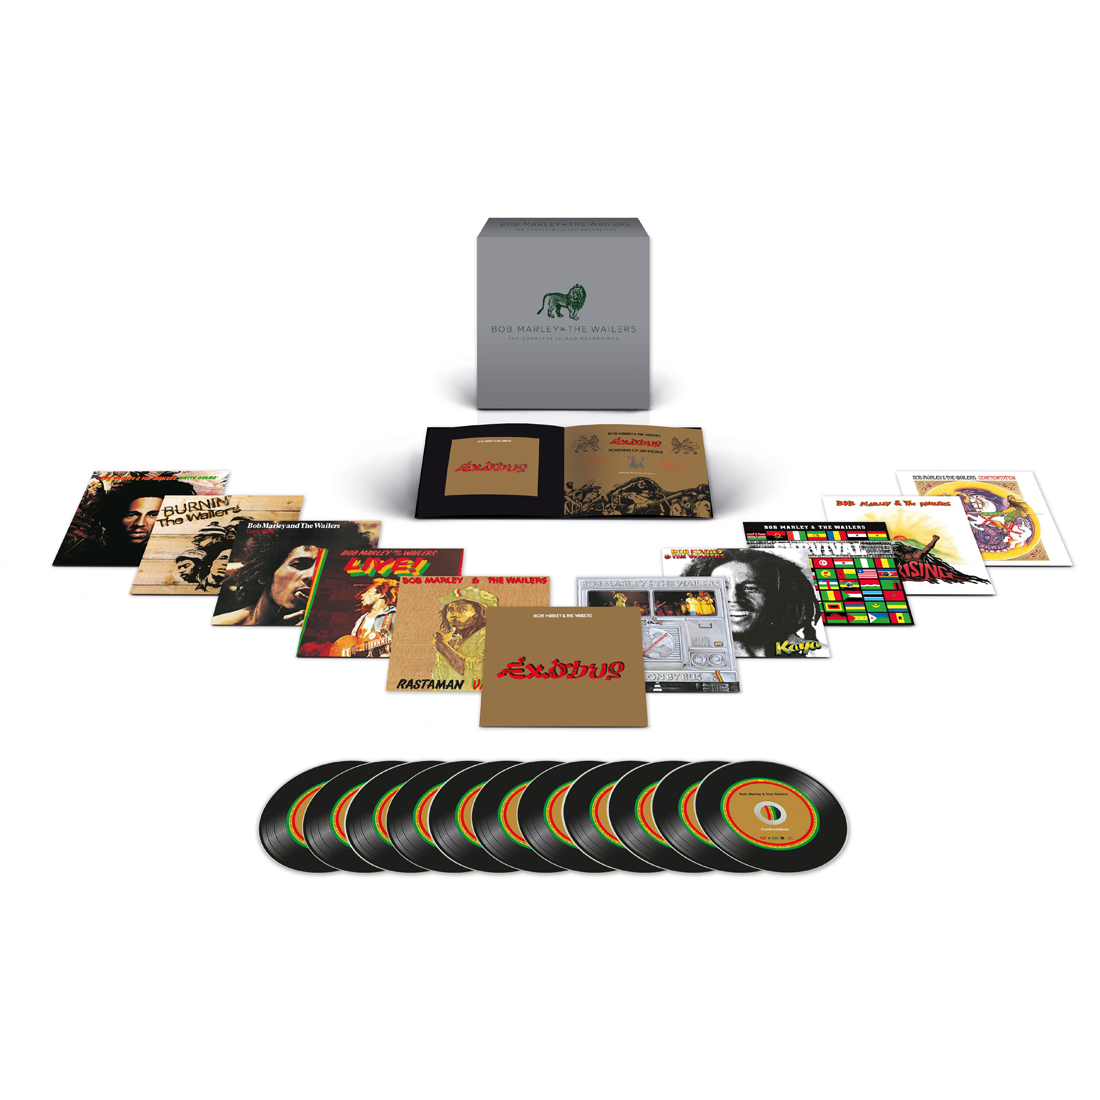 Bob Marley and The Wailers - The Complete Island Recordings Box Set